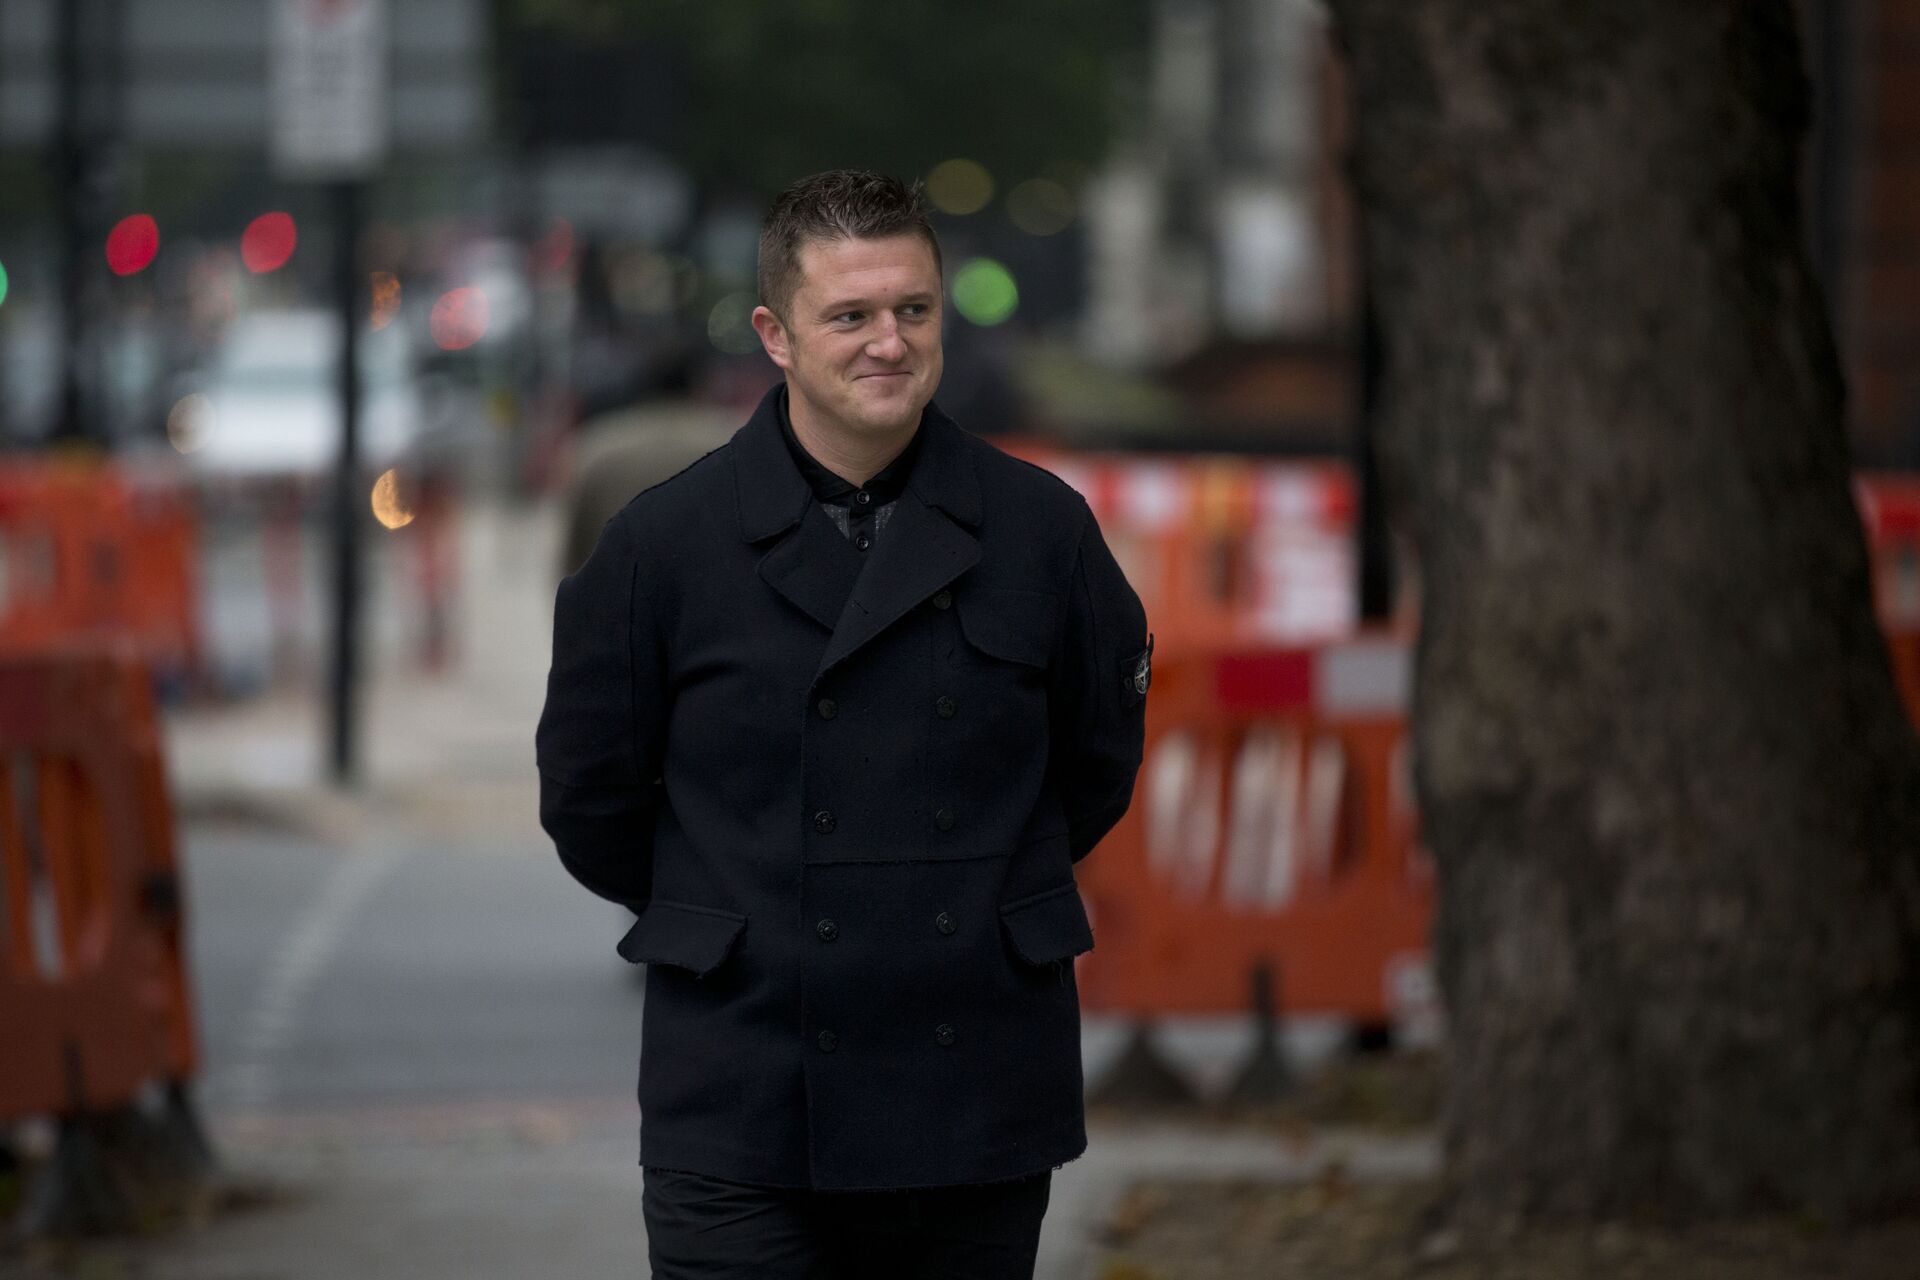 ‘F***ing Loaded’ Tommy Robinson Denies Allegations He Spent Donations on ‘Coke and Prostitutes’ - Sputnik International, 1920, 20.03.2021